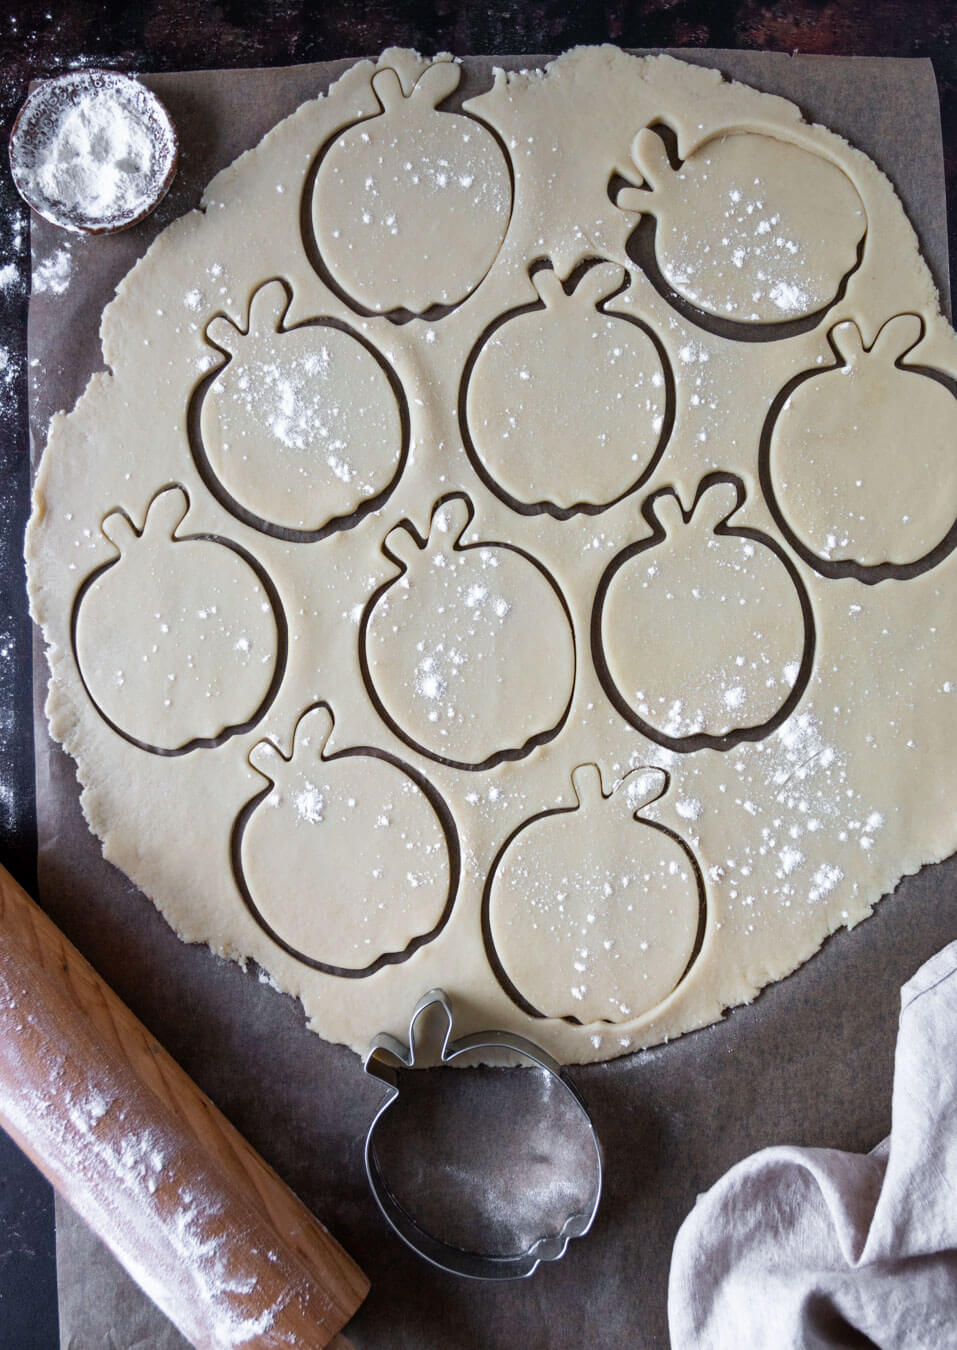 Top down view of pastry with cut out apple shapes & a rolling pin